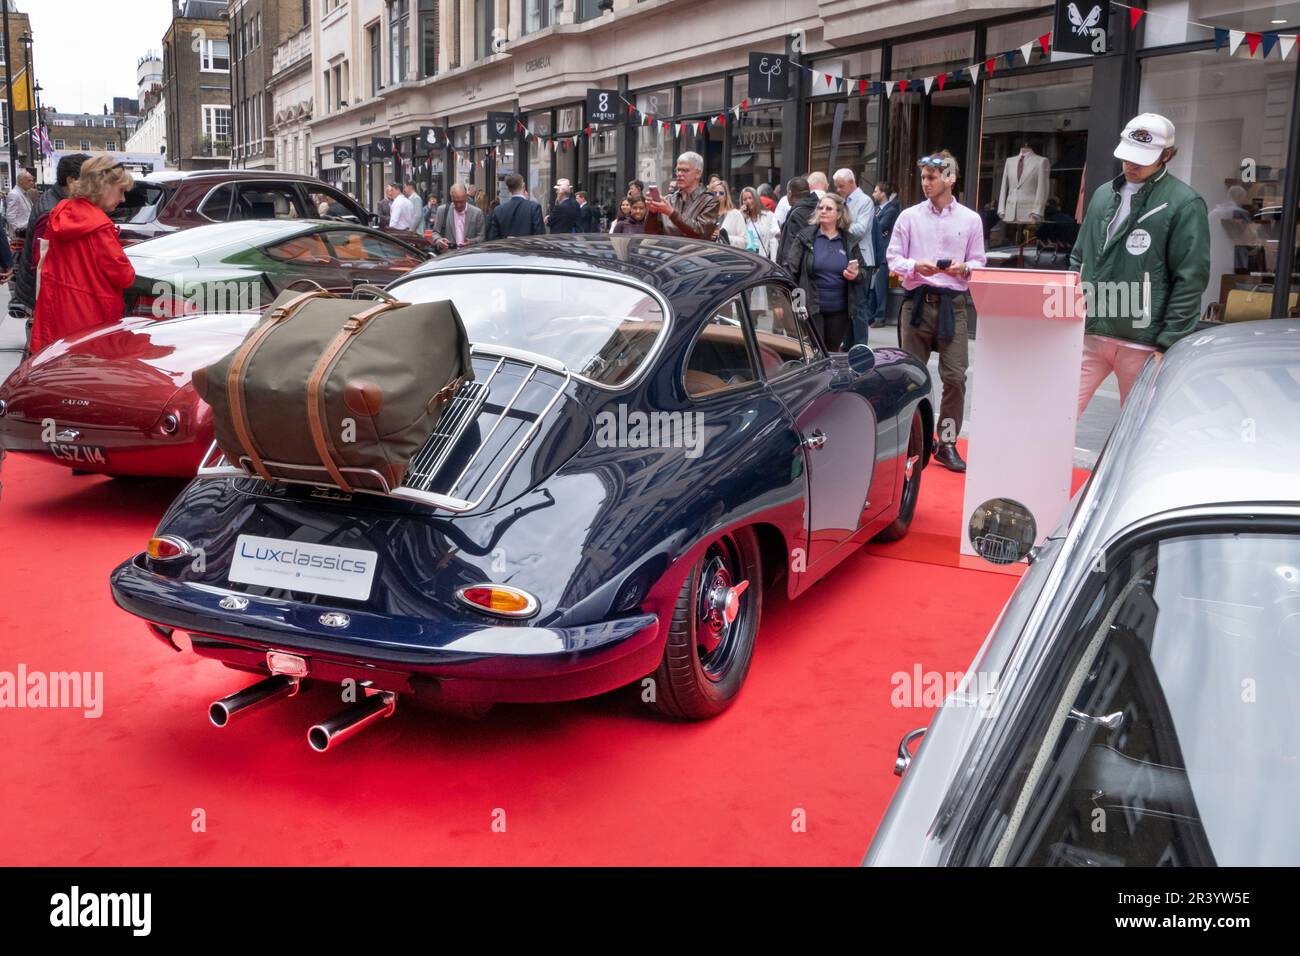 1965 Porsche 366 C at the Concours on Savile Row 2023. Classic car concours on the famous street for Tailoring in London UK Stock Photo